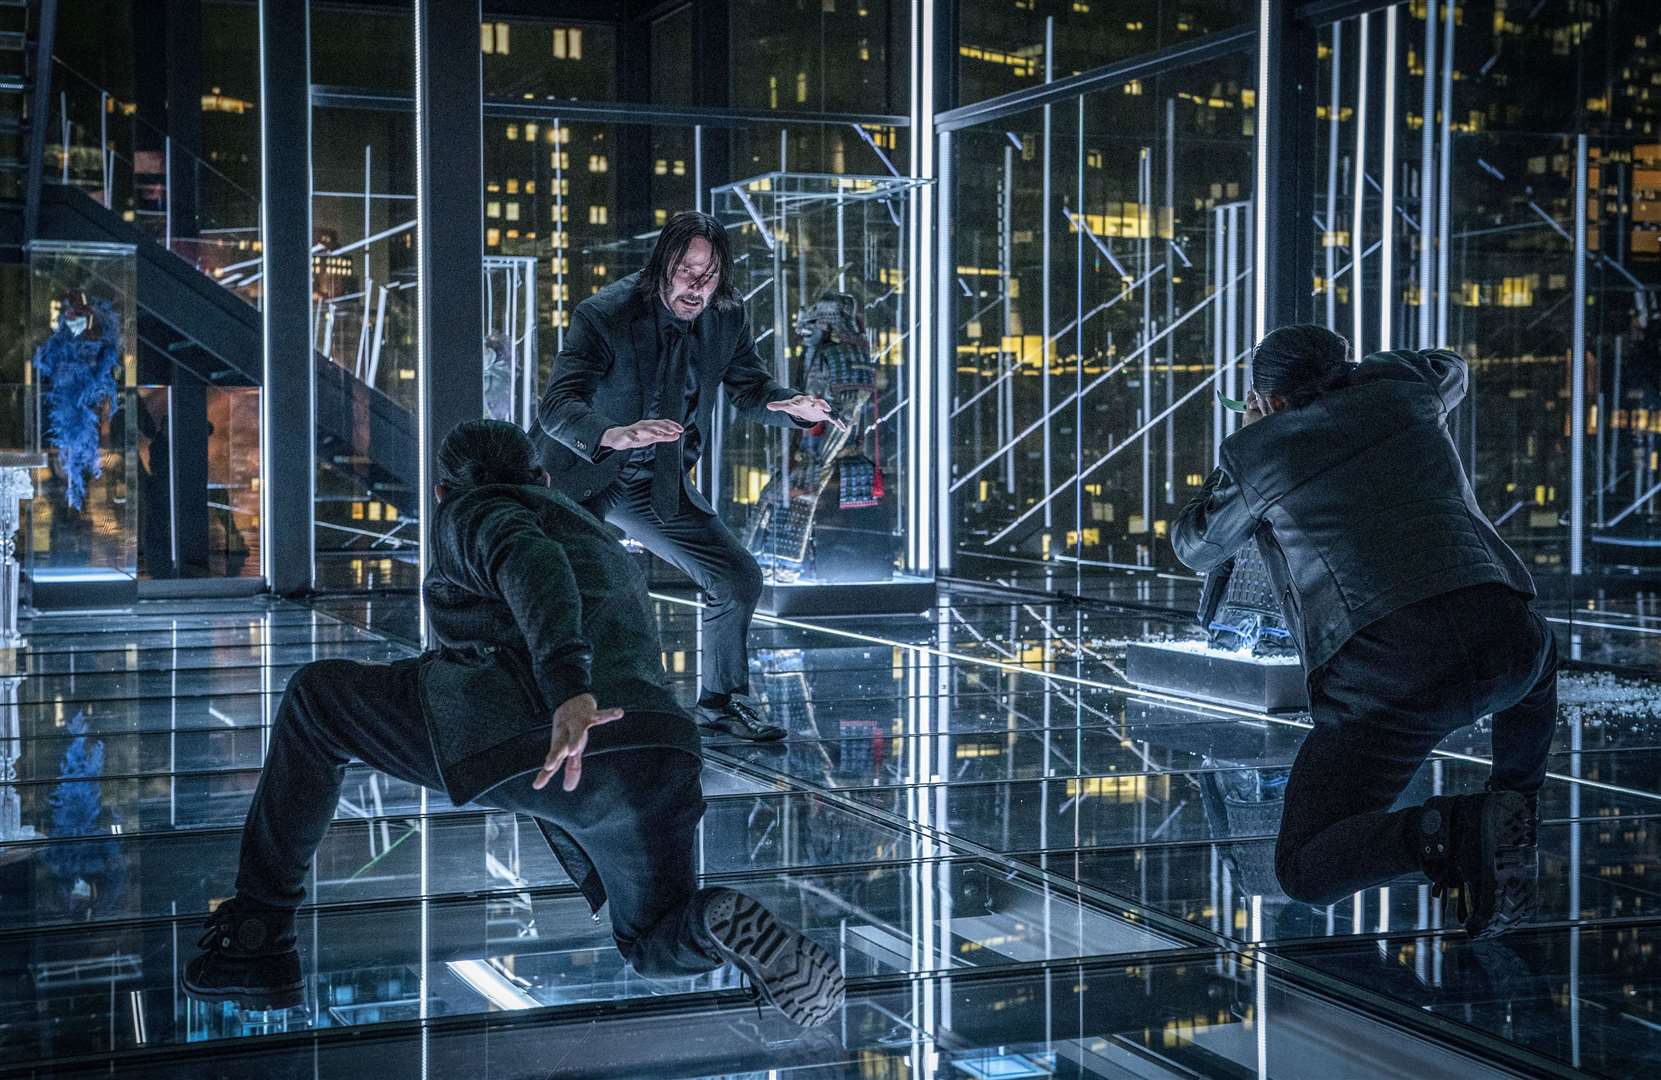 Keanu is back in John Wick and The Matrix Picture: Lionsgate Films/Niko Tavernise